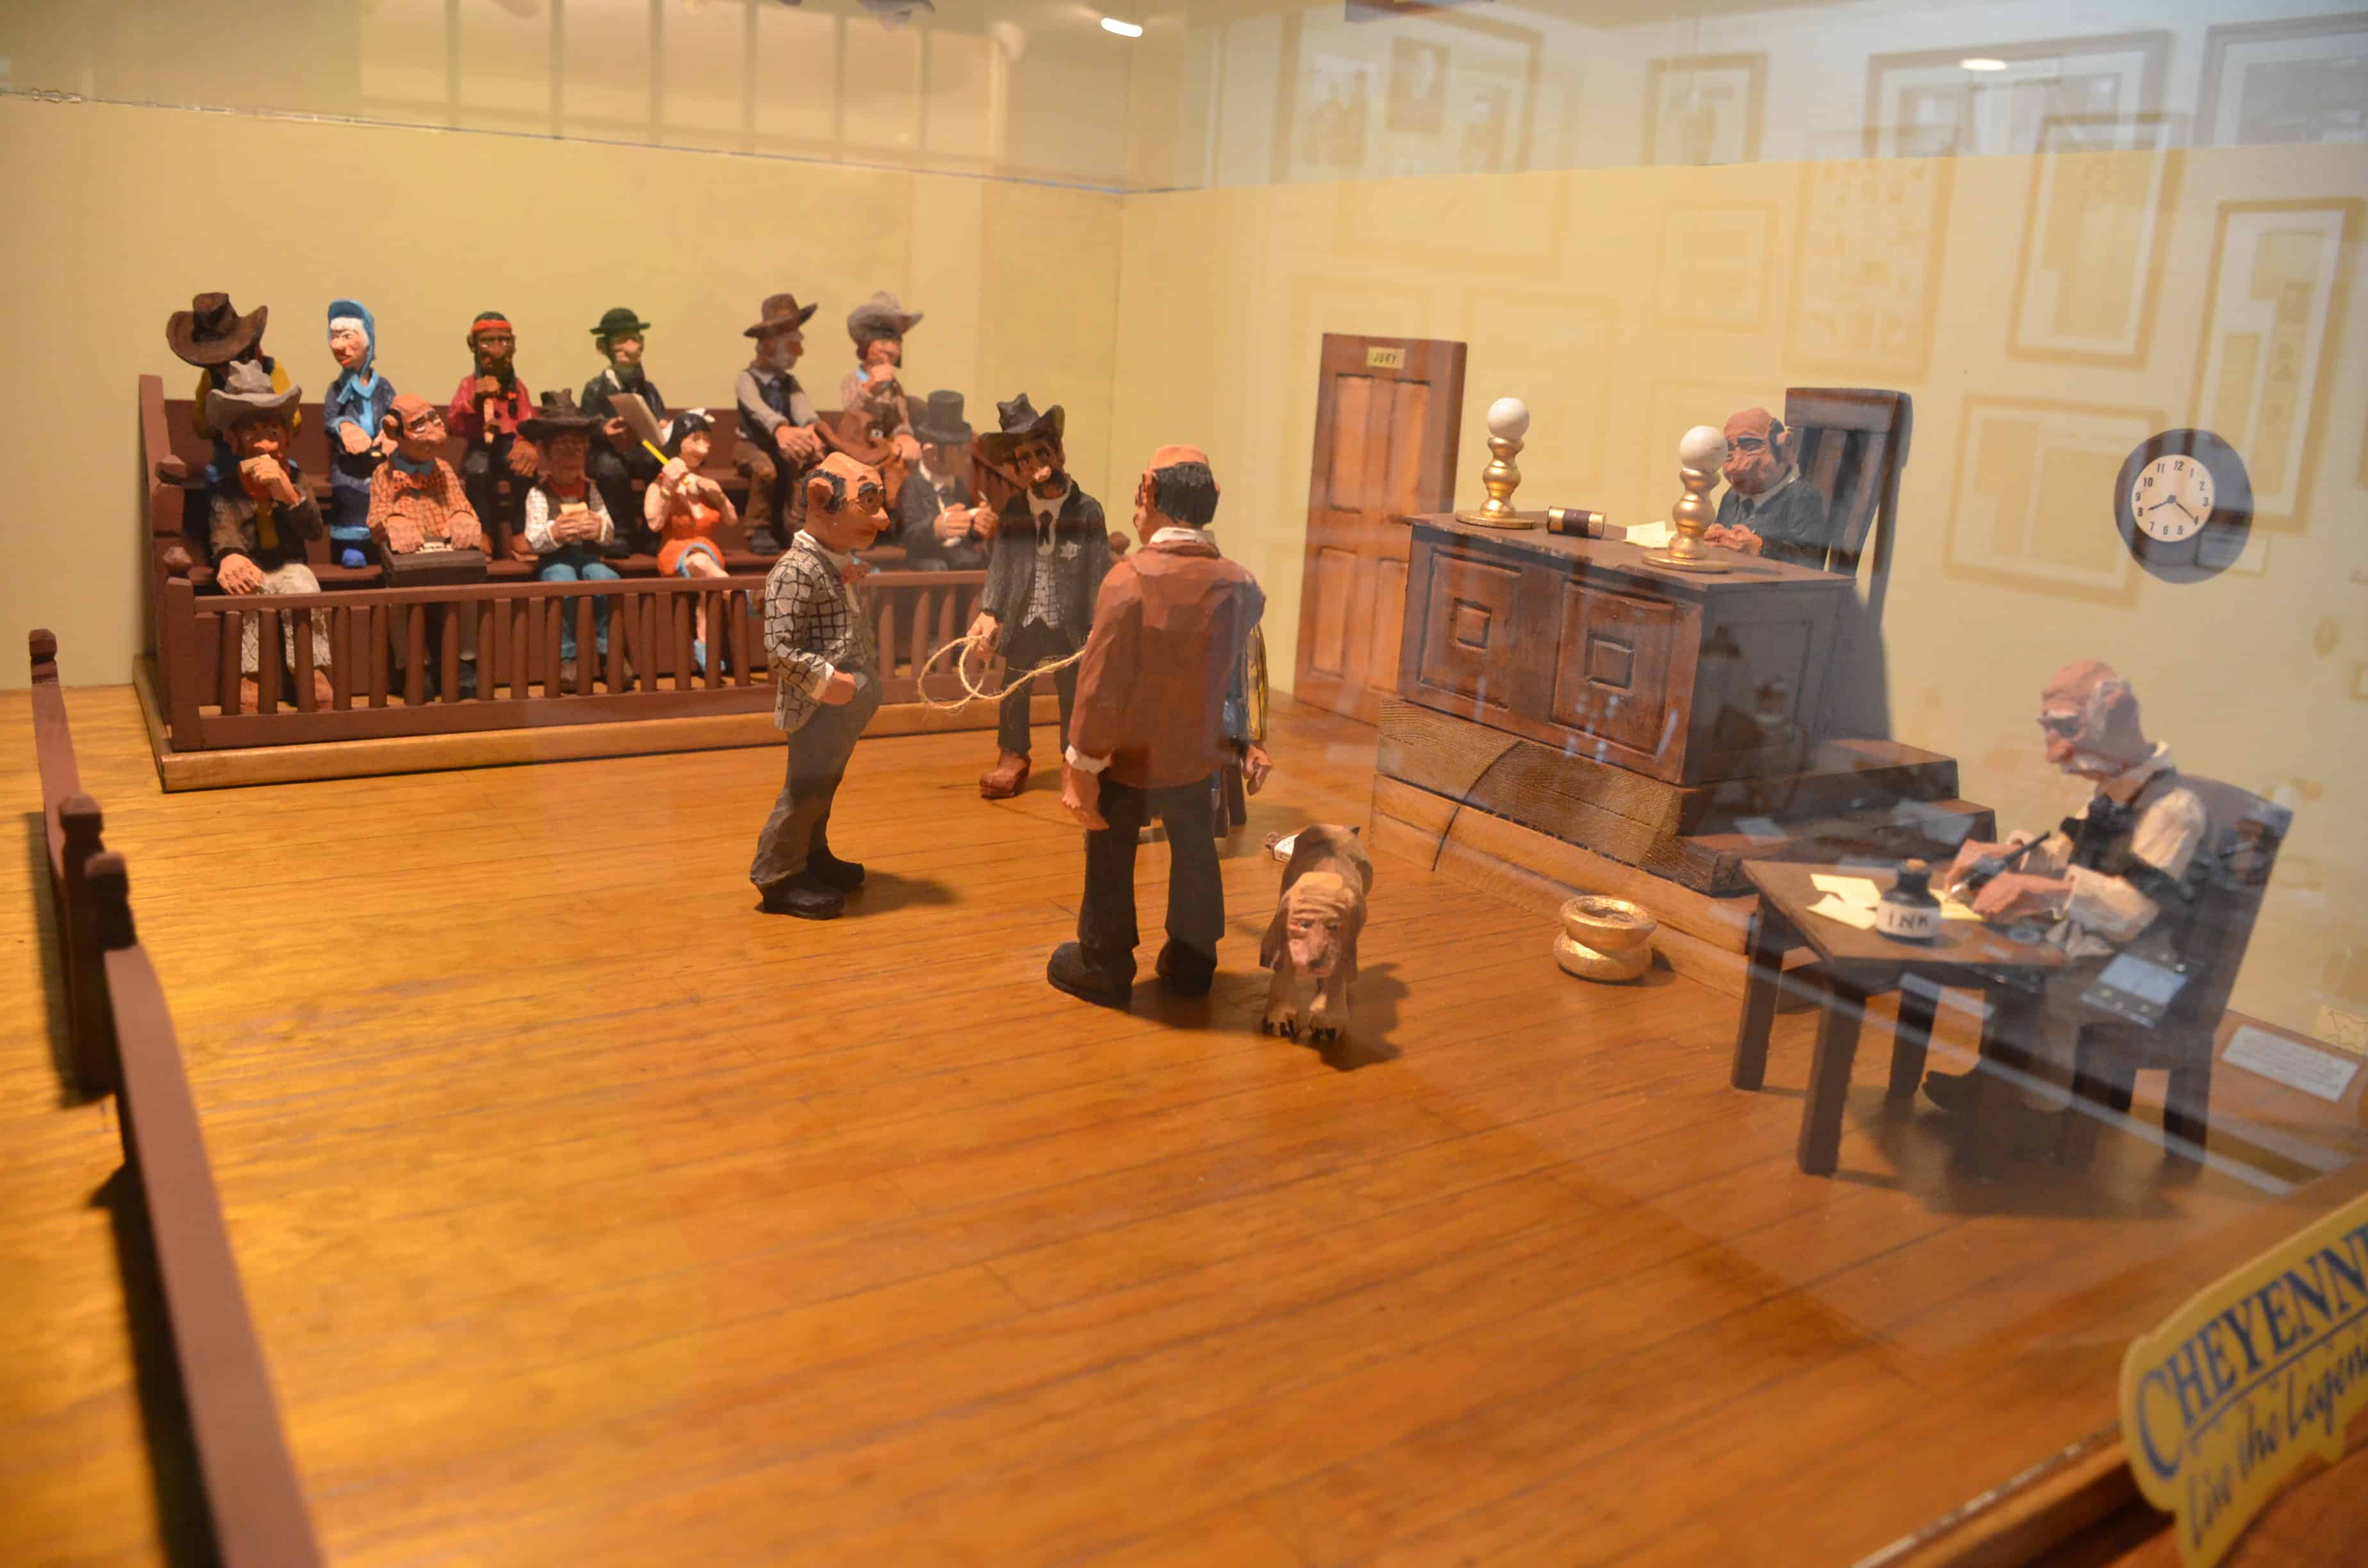 Courtroom scene at the Nelson Museum of the West in Cheyenne, Wyoming